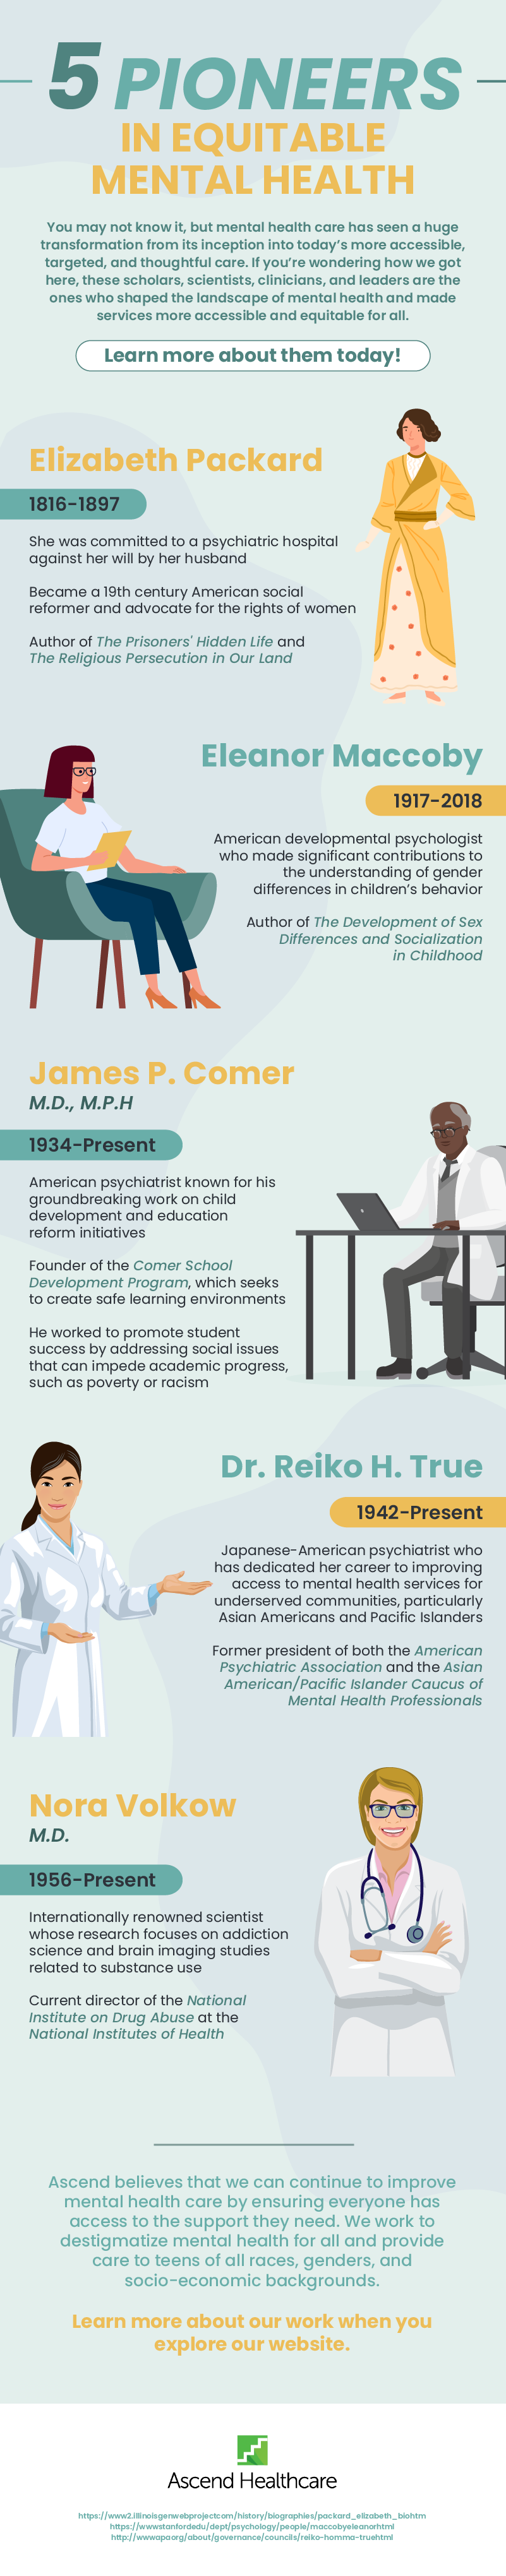 infographic about five pioneers in equitable mental health